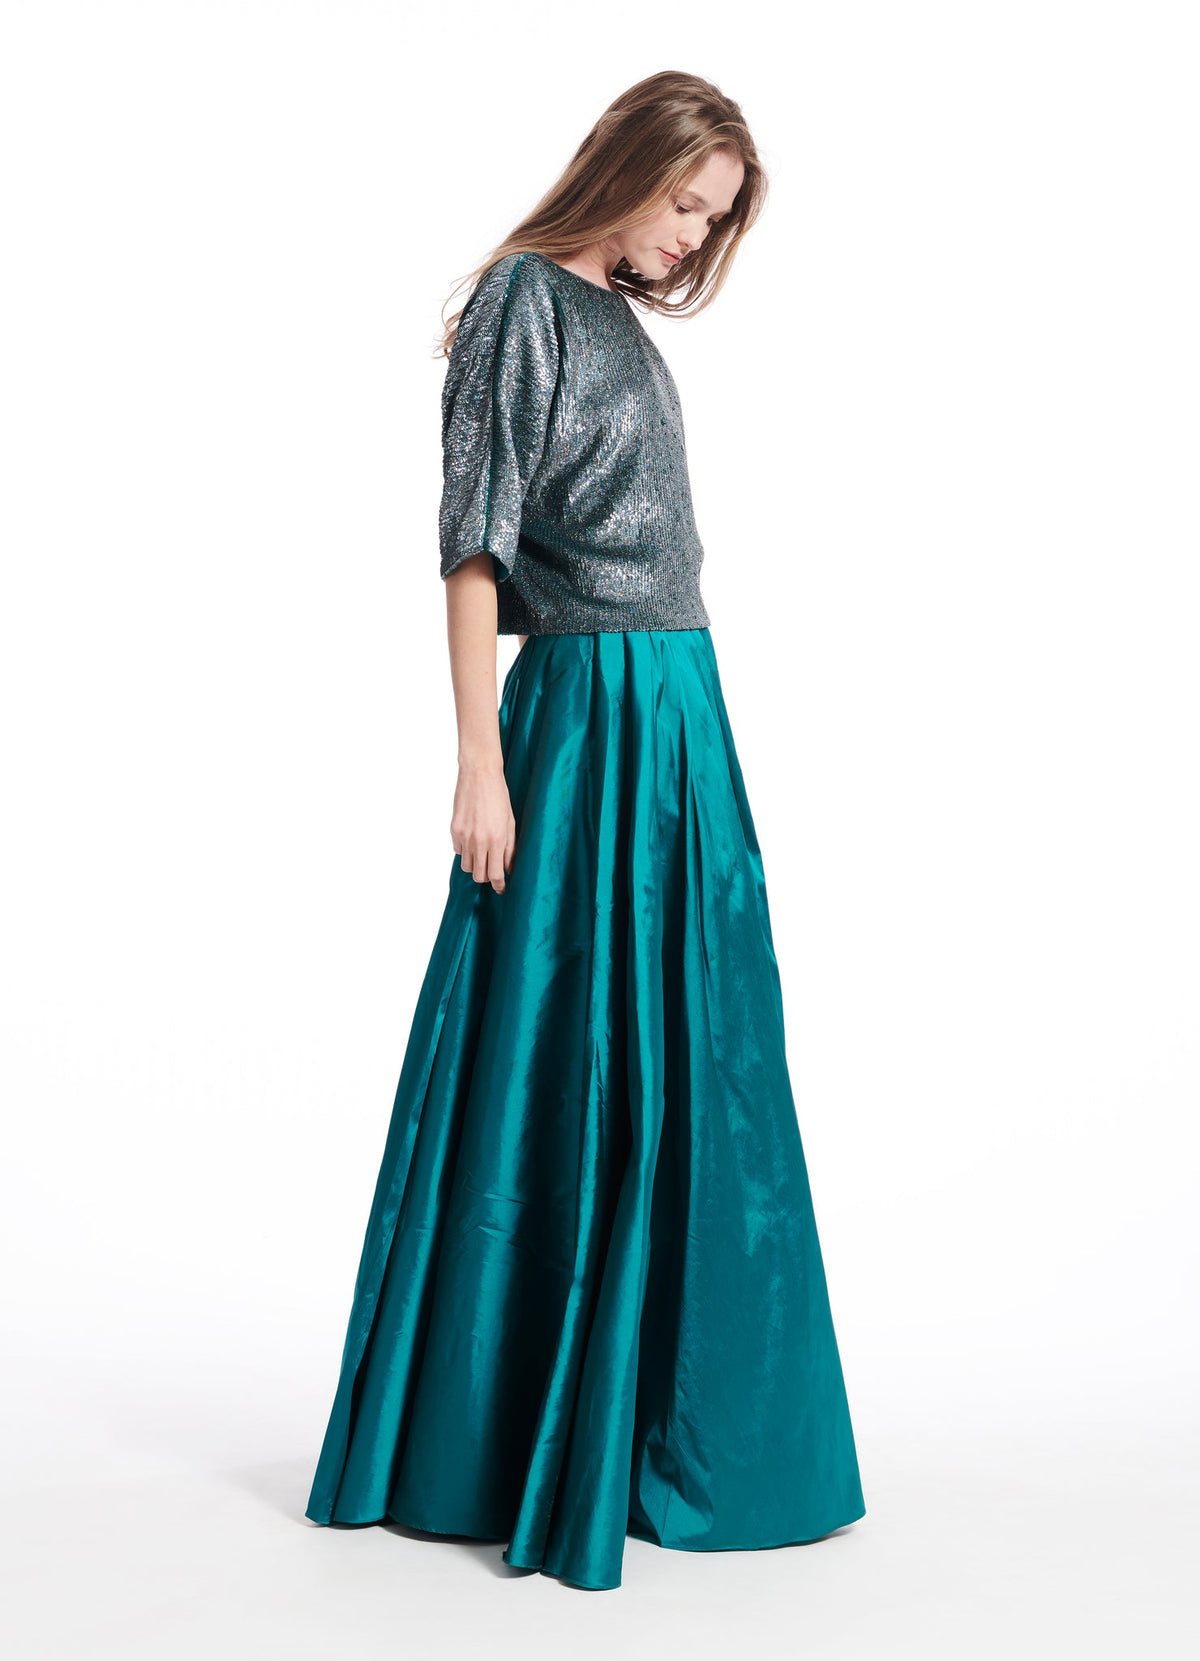 Sequin Blouson with Dolman Sleeves